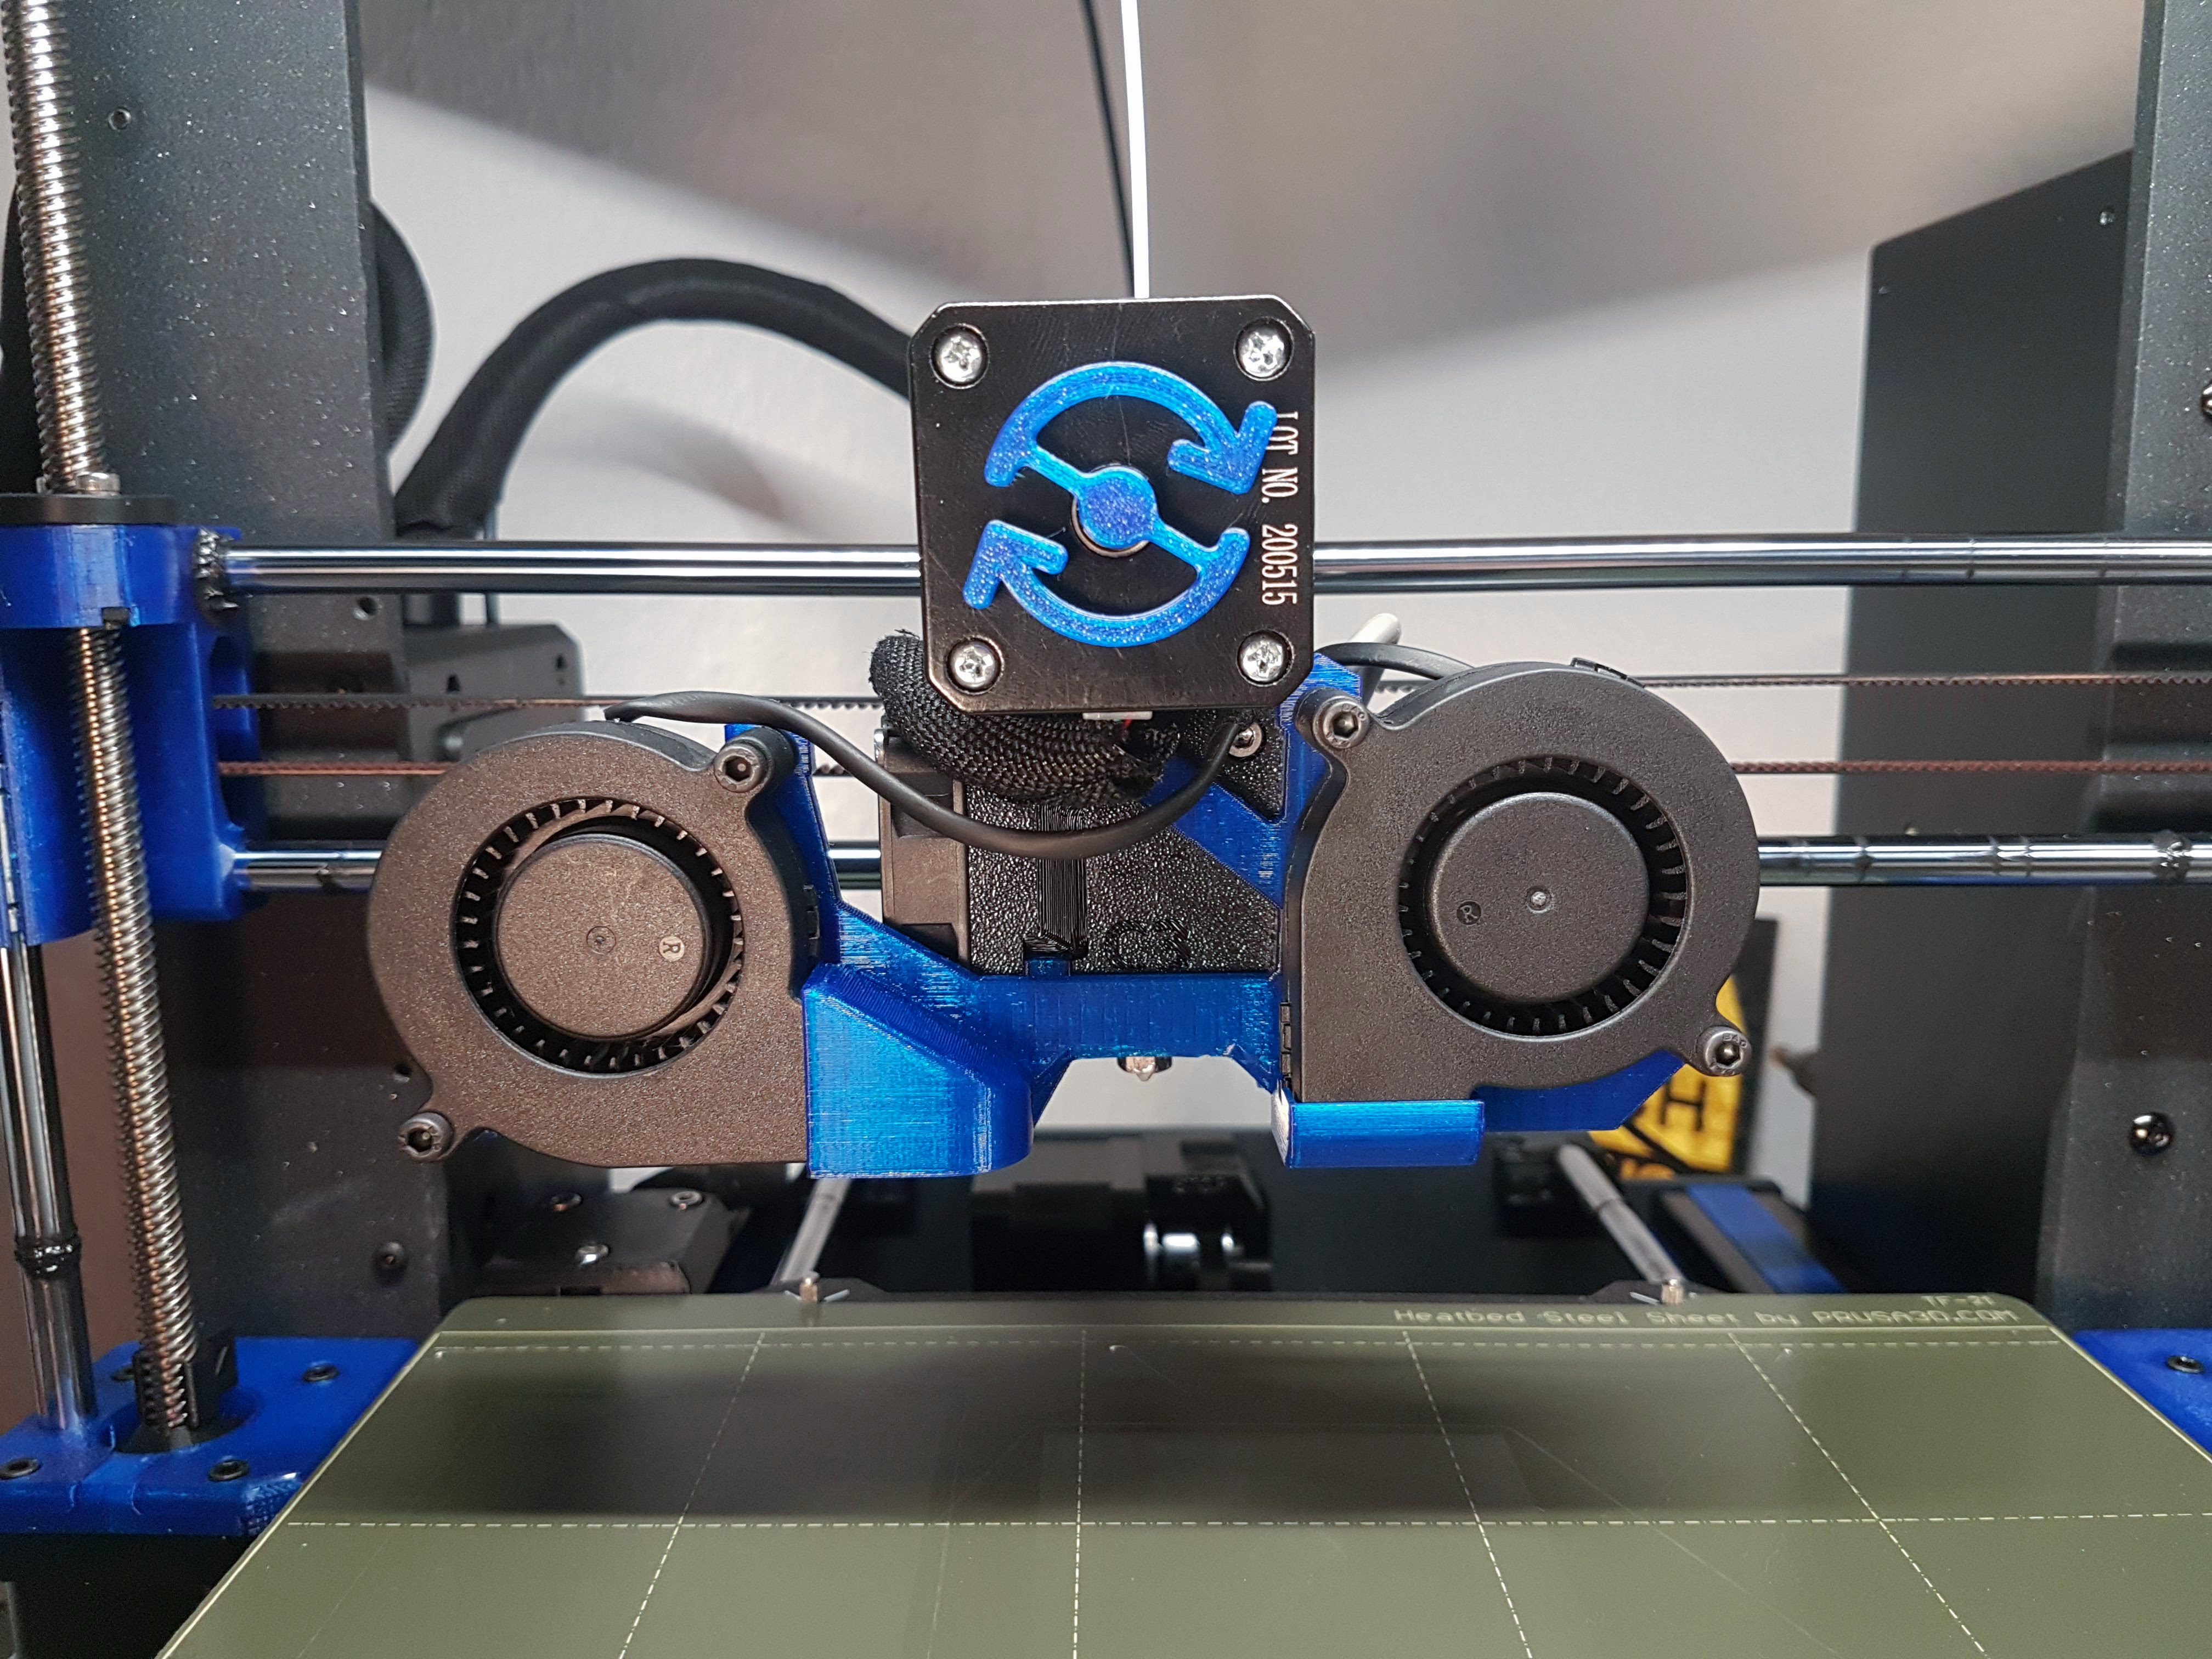 Dual Fan For MK3S/+ Extruder